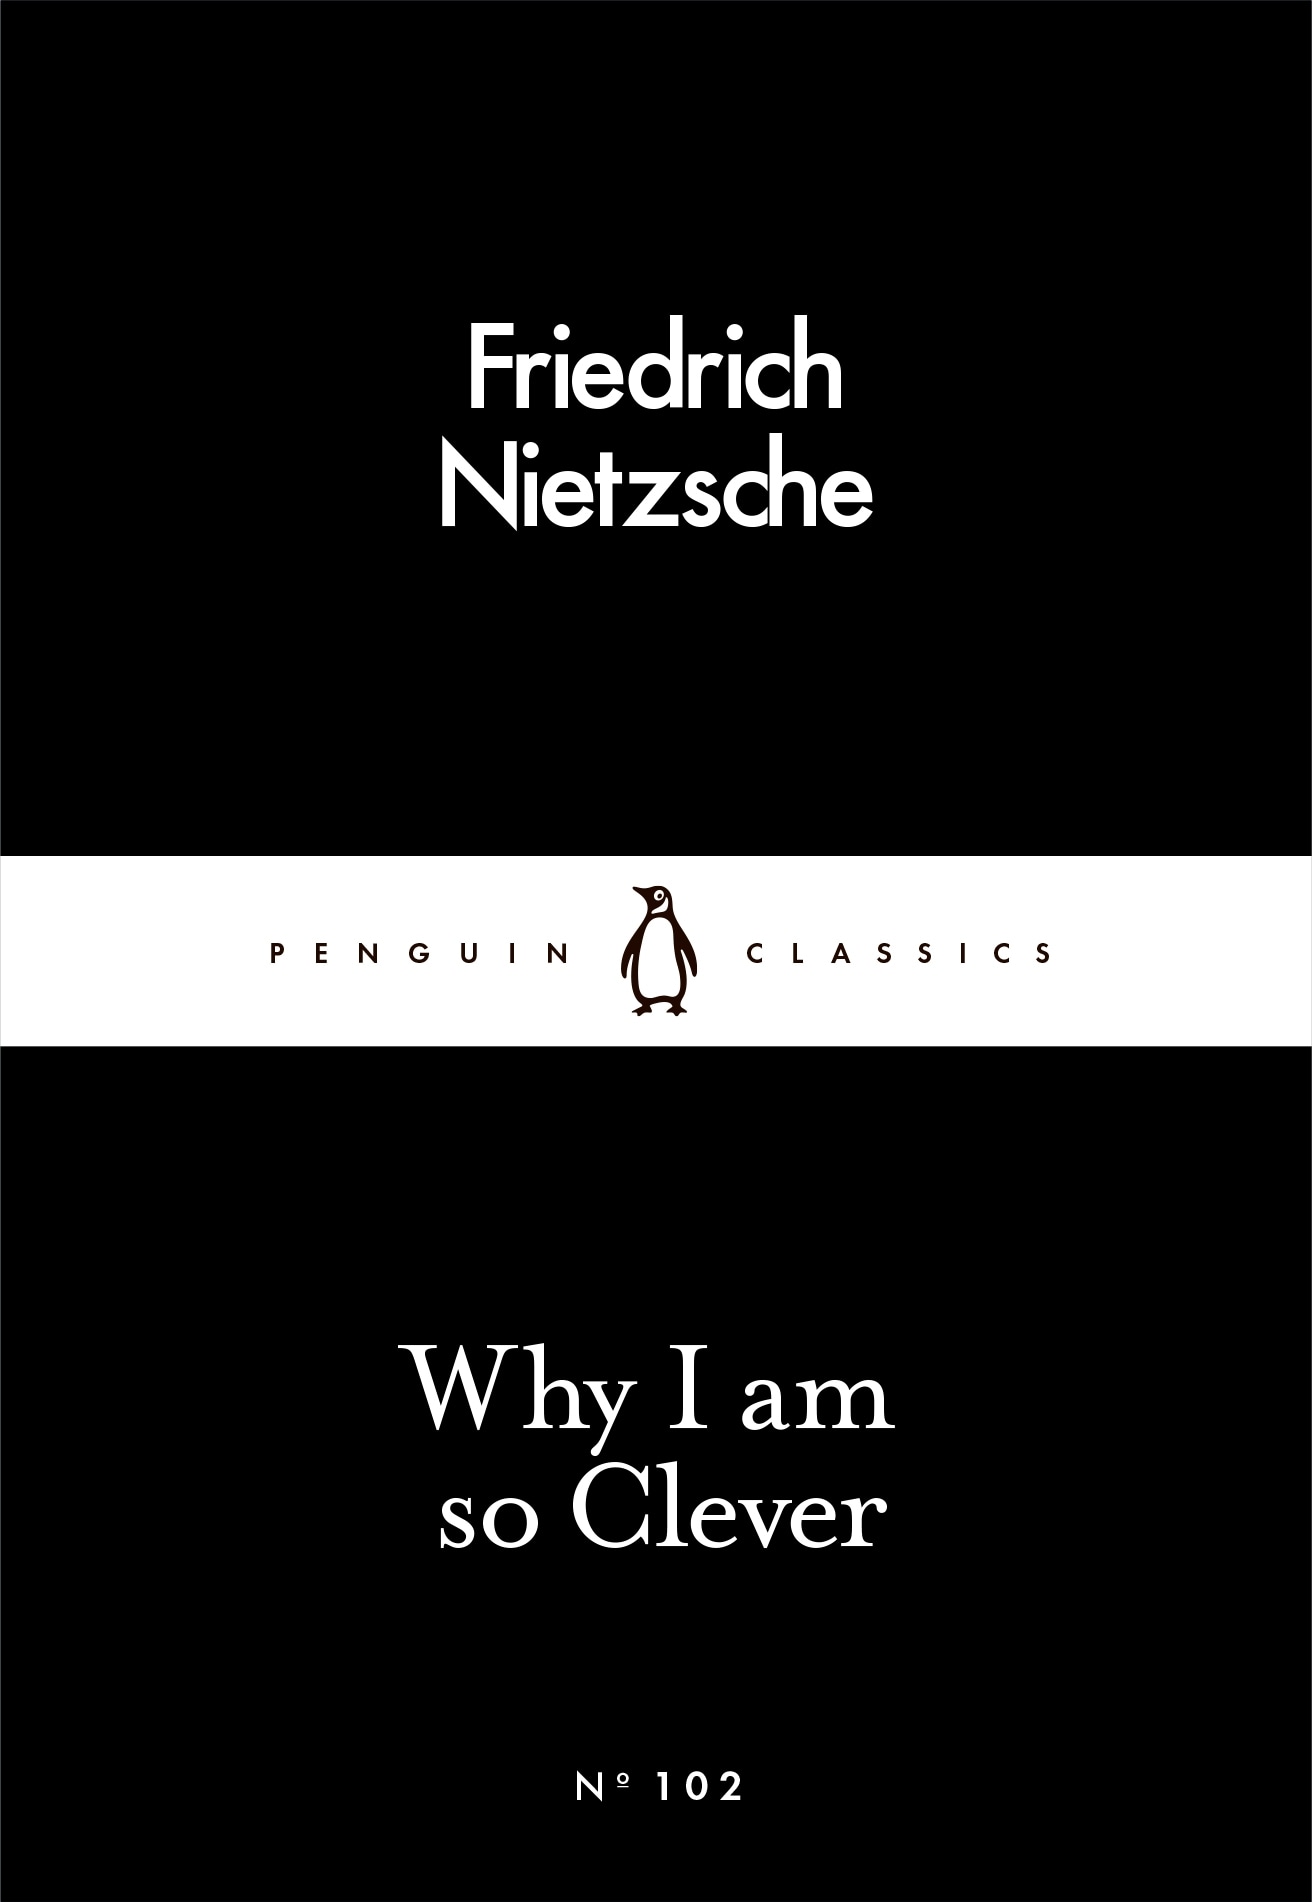 Book “Why I Am so Clever” by Friedrich Nietzsche — March 3, 2016